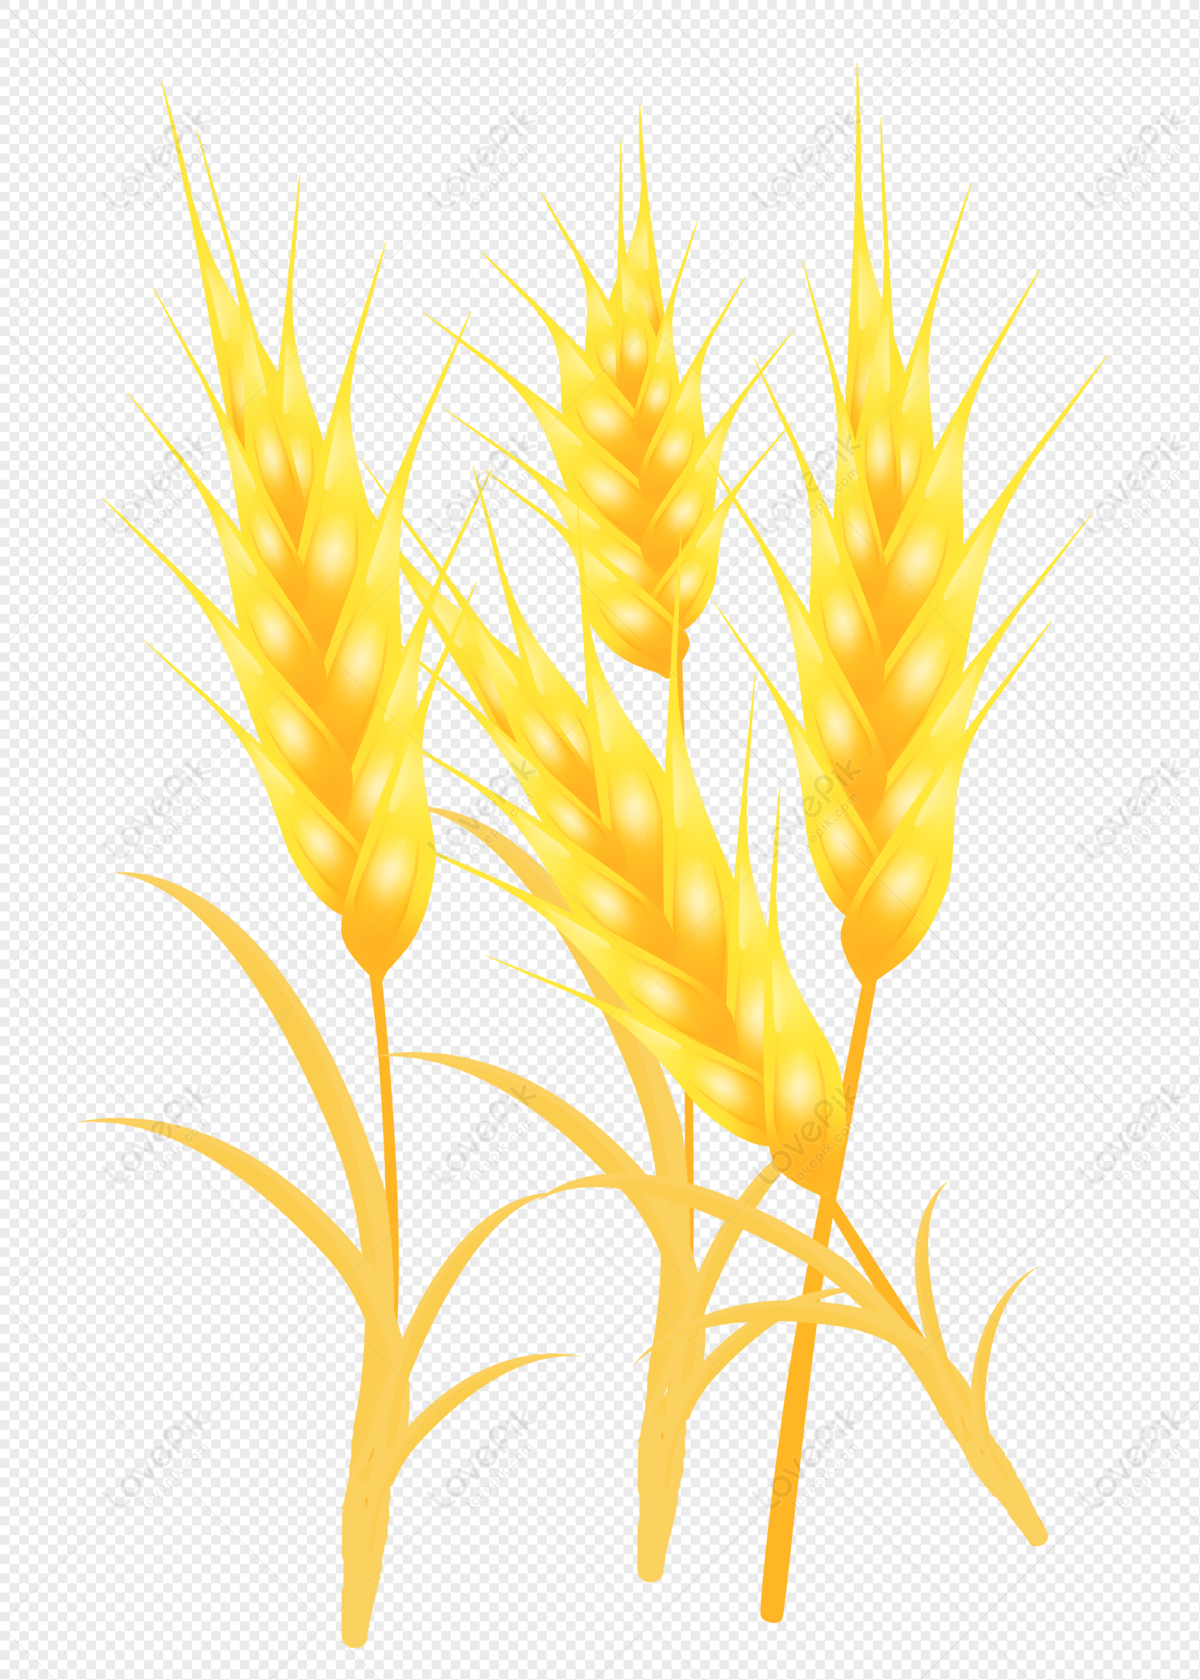 Several Golden Yellow Wheat PNG Transparent Background And Clipart Image  For Free Download - Lovepik | 401362960